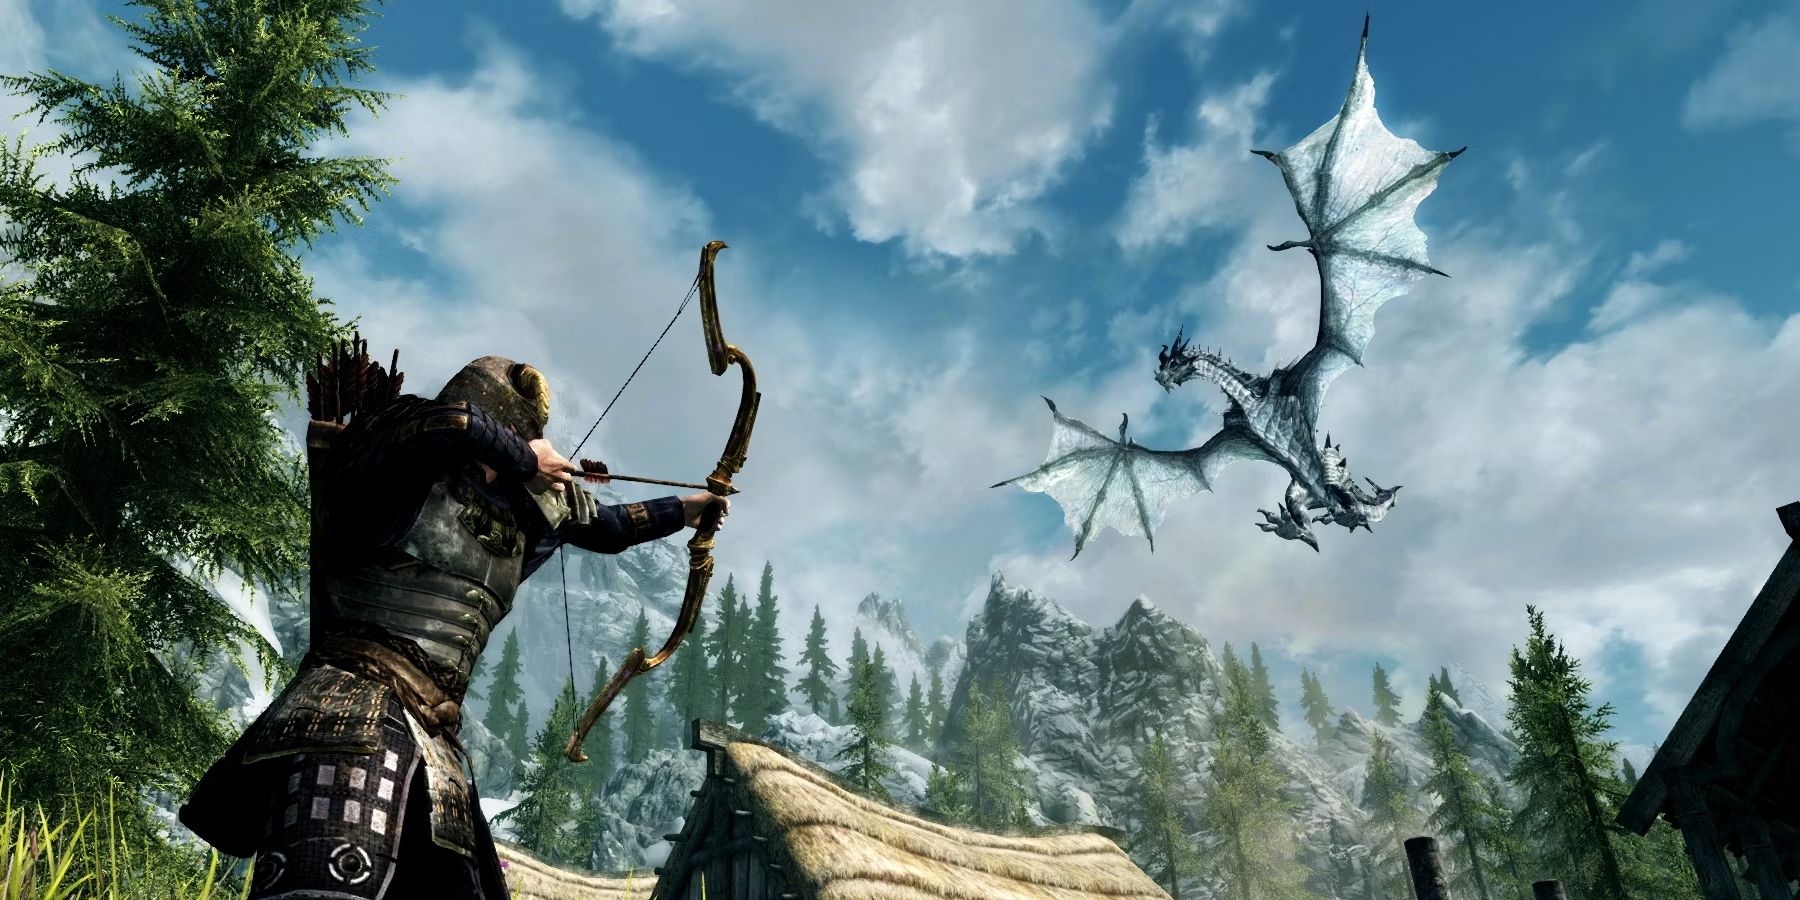 A screenshot from Skyrim showing a player character shooting a bow at a dragon.